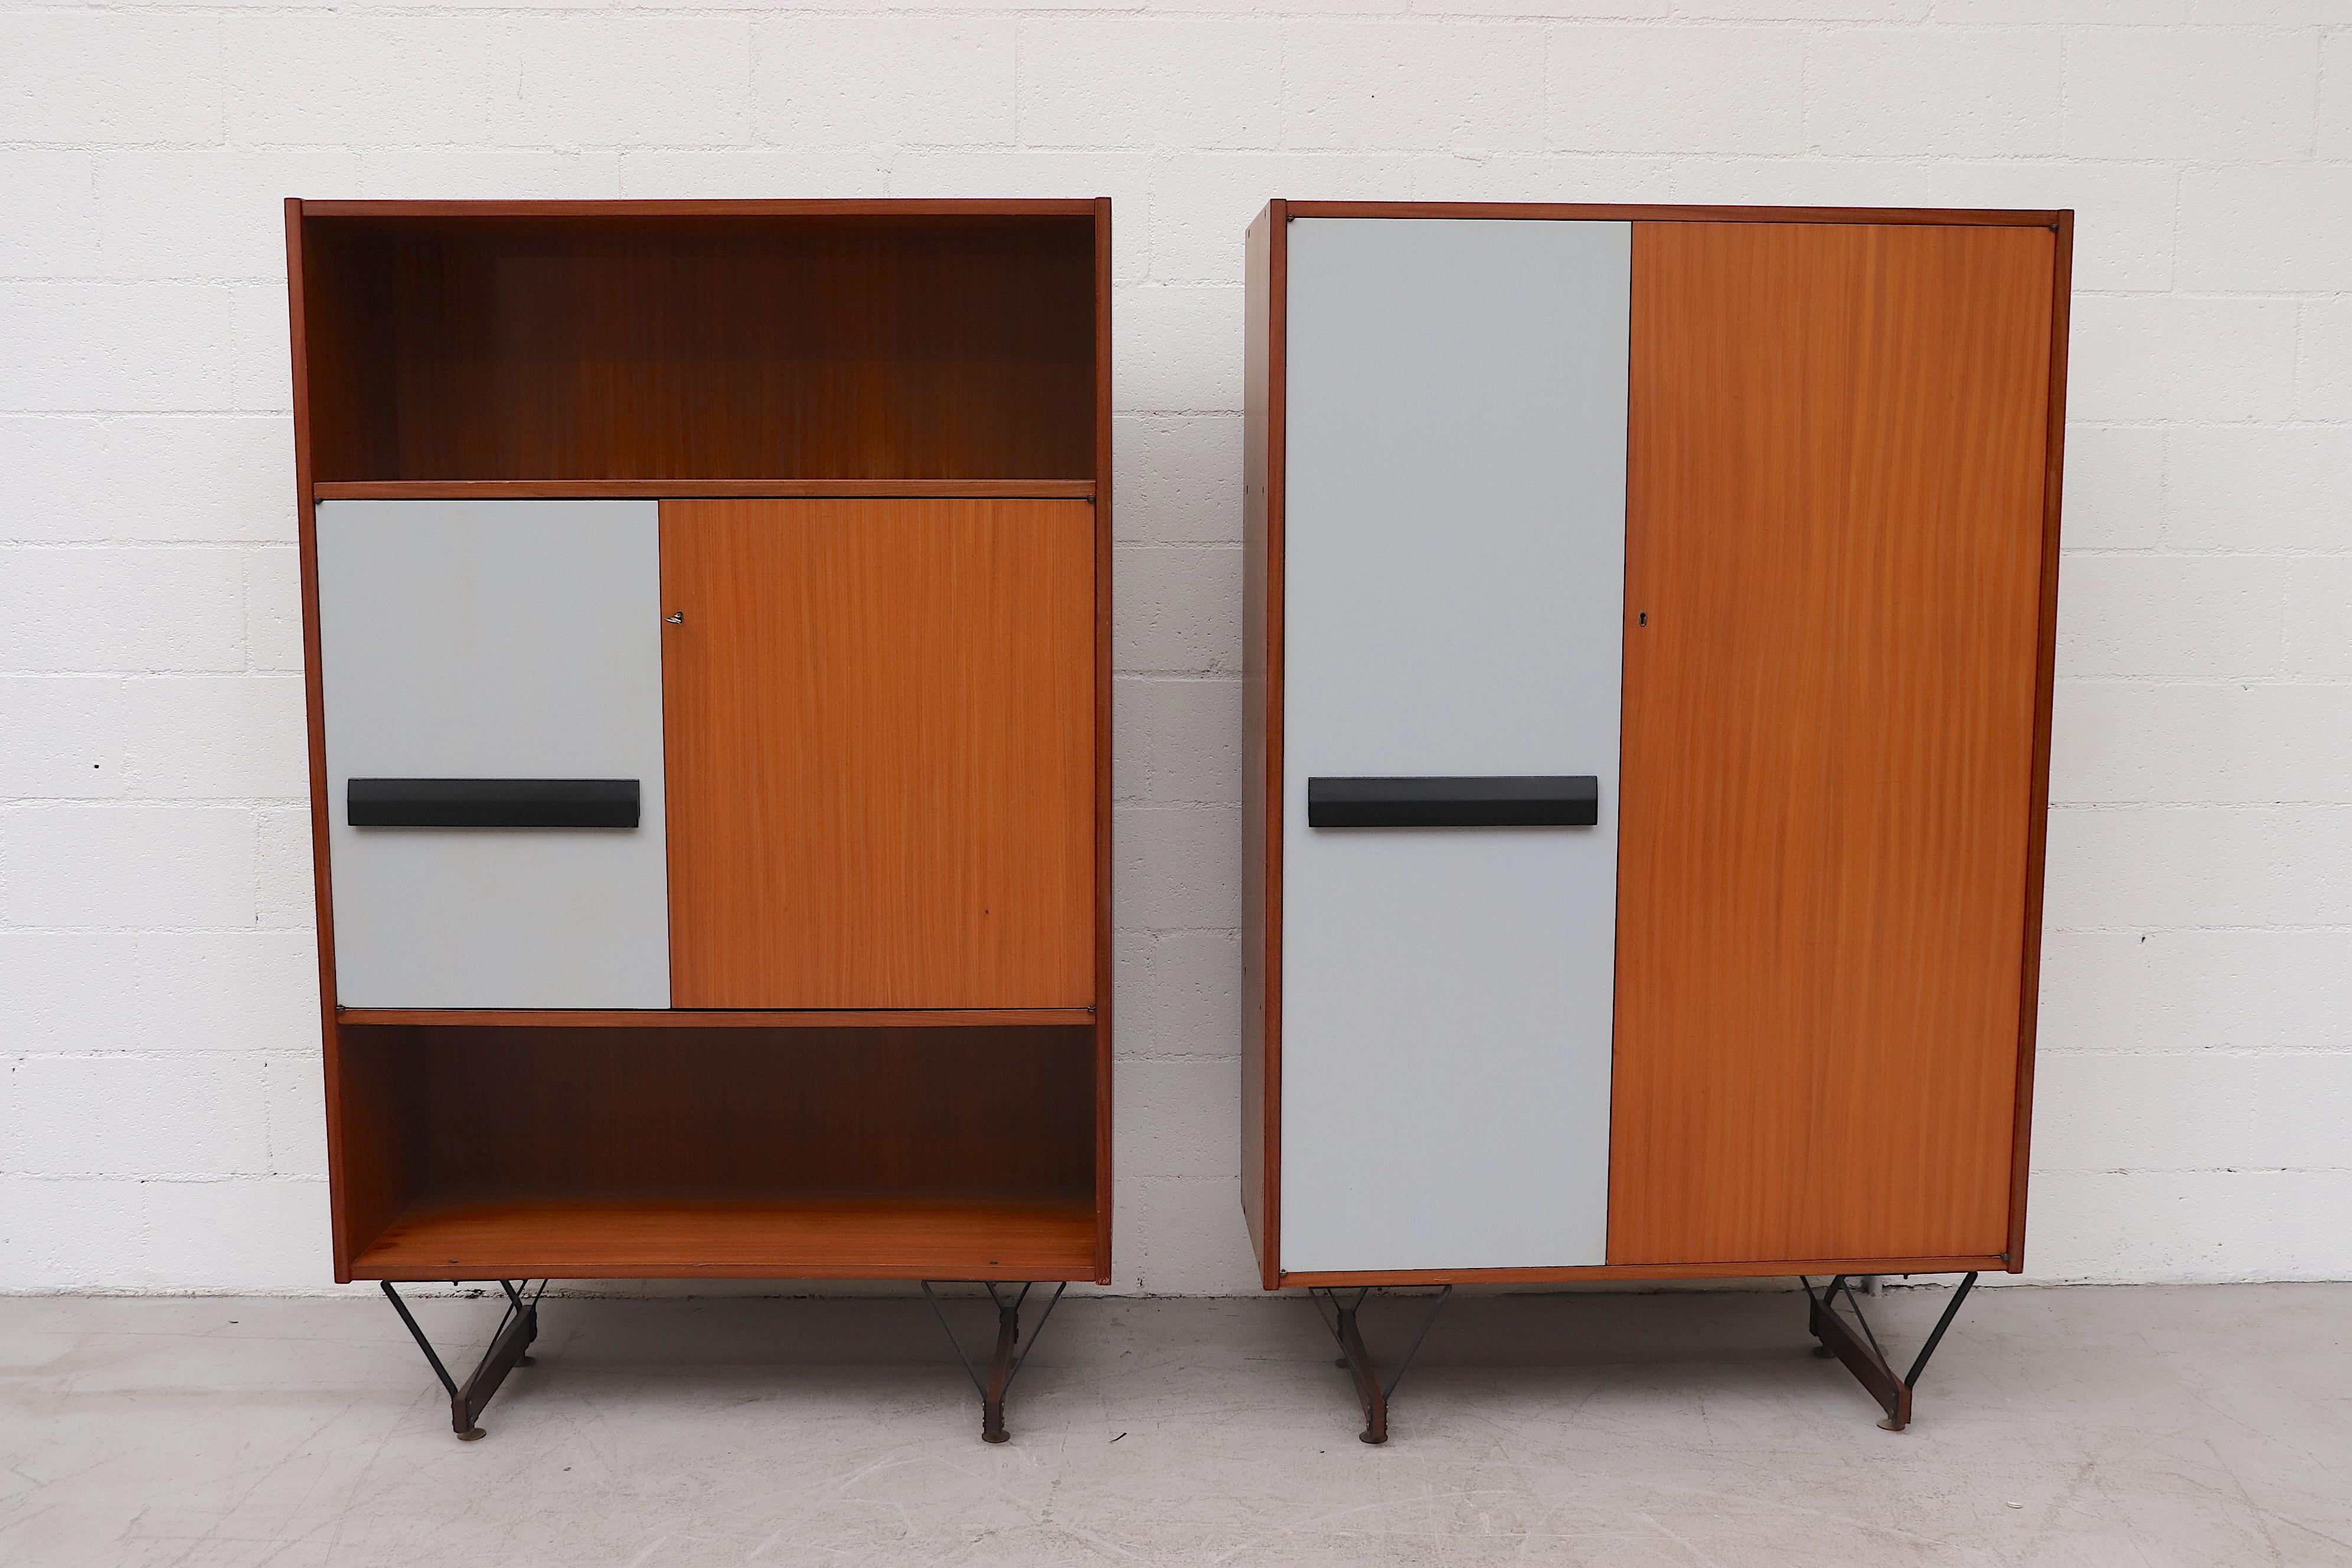 Stunning midcentury Italian wardrobe cabinet with double doors, one in teak, the other with a painted grey and a black door pull. Both open to built-in storage shelves. The cabinet stands on architectural black enameled metal hairpin-like legs.